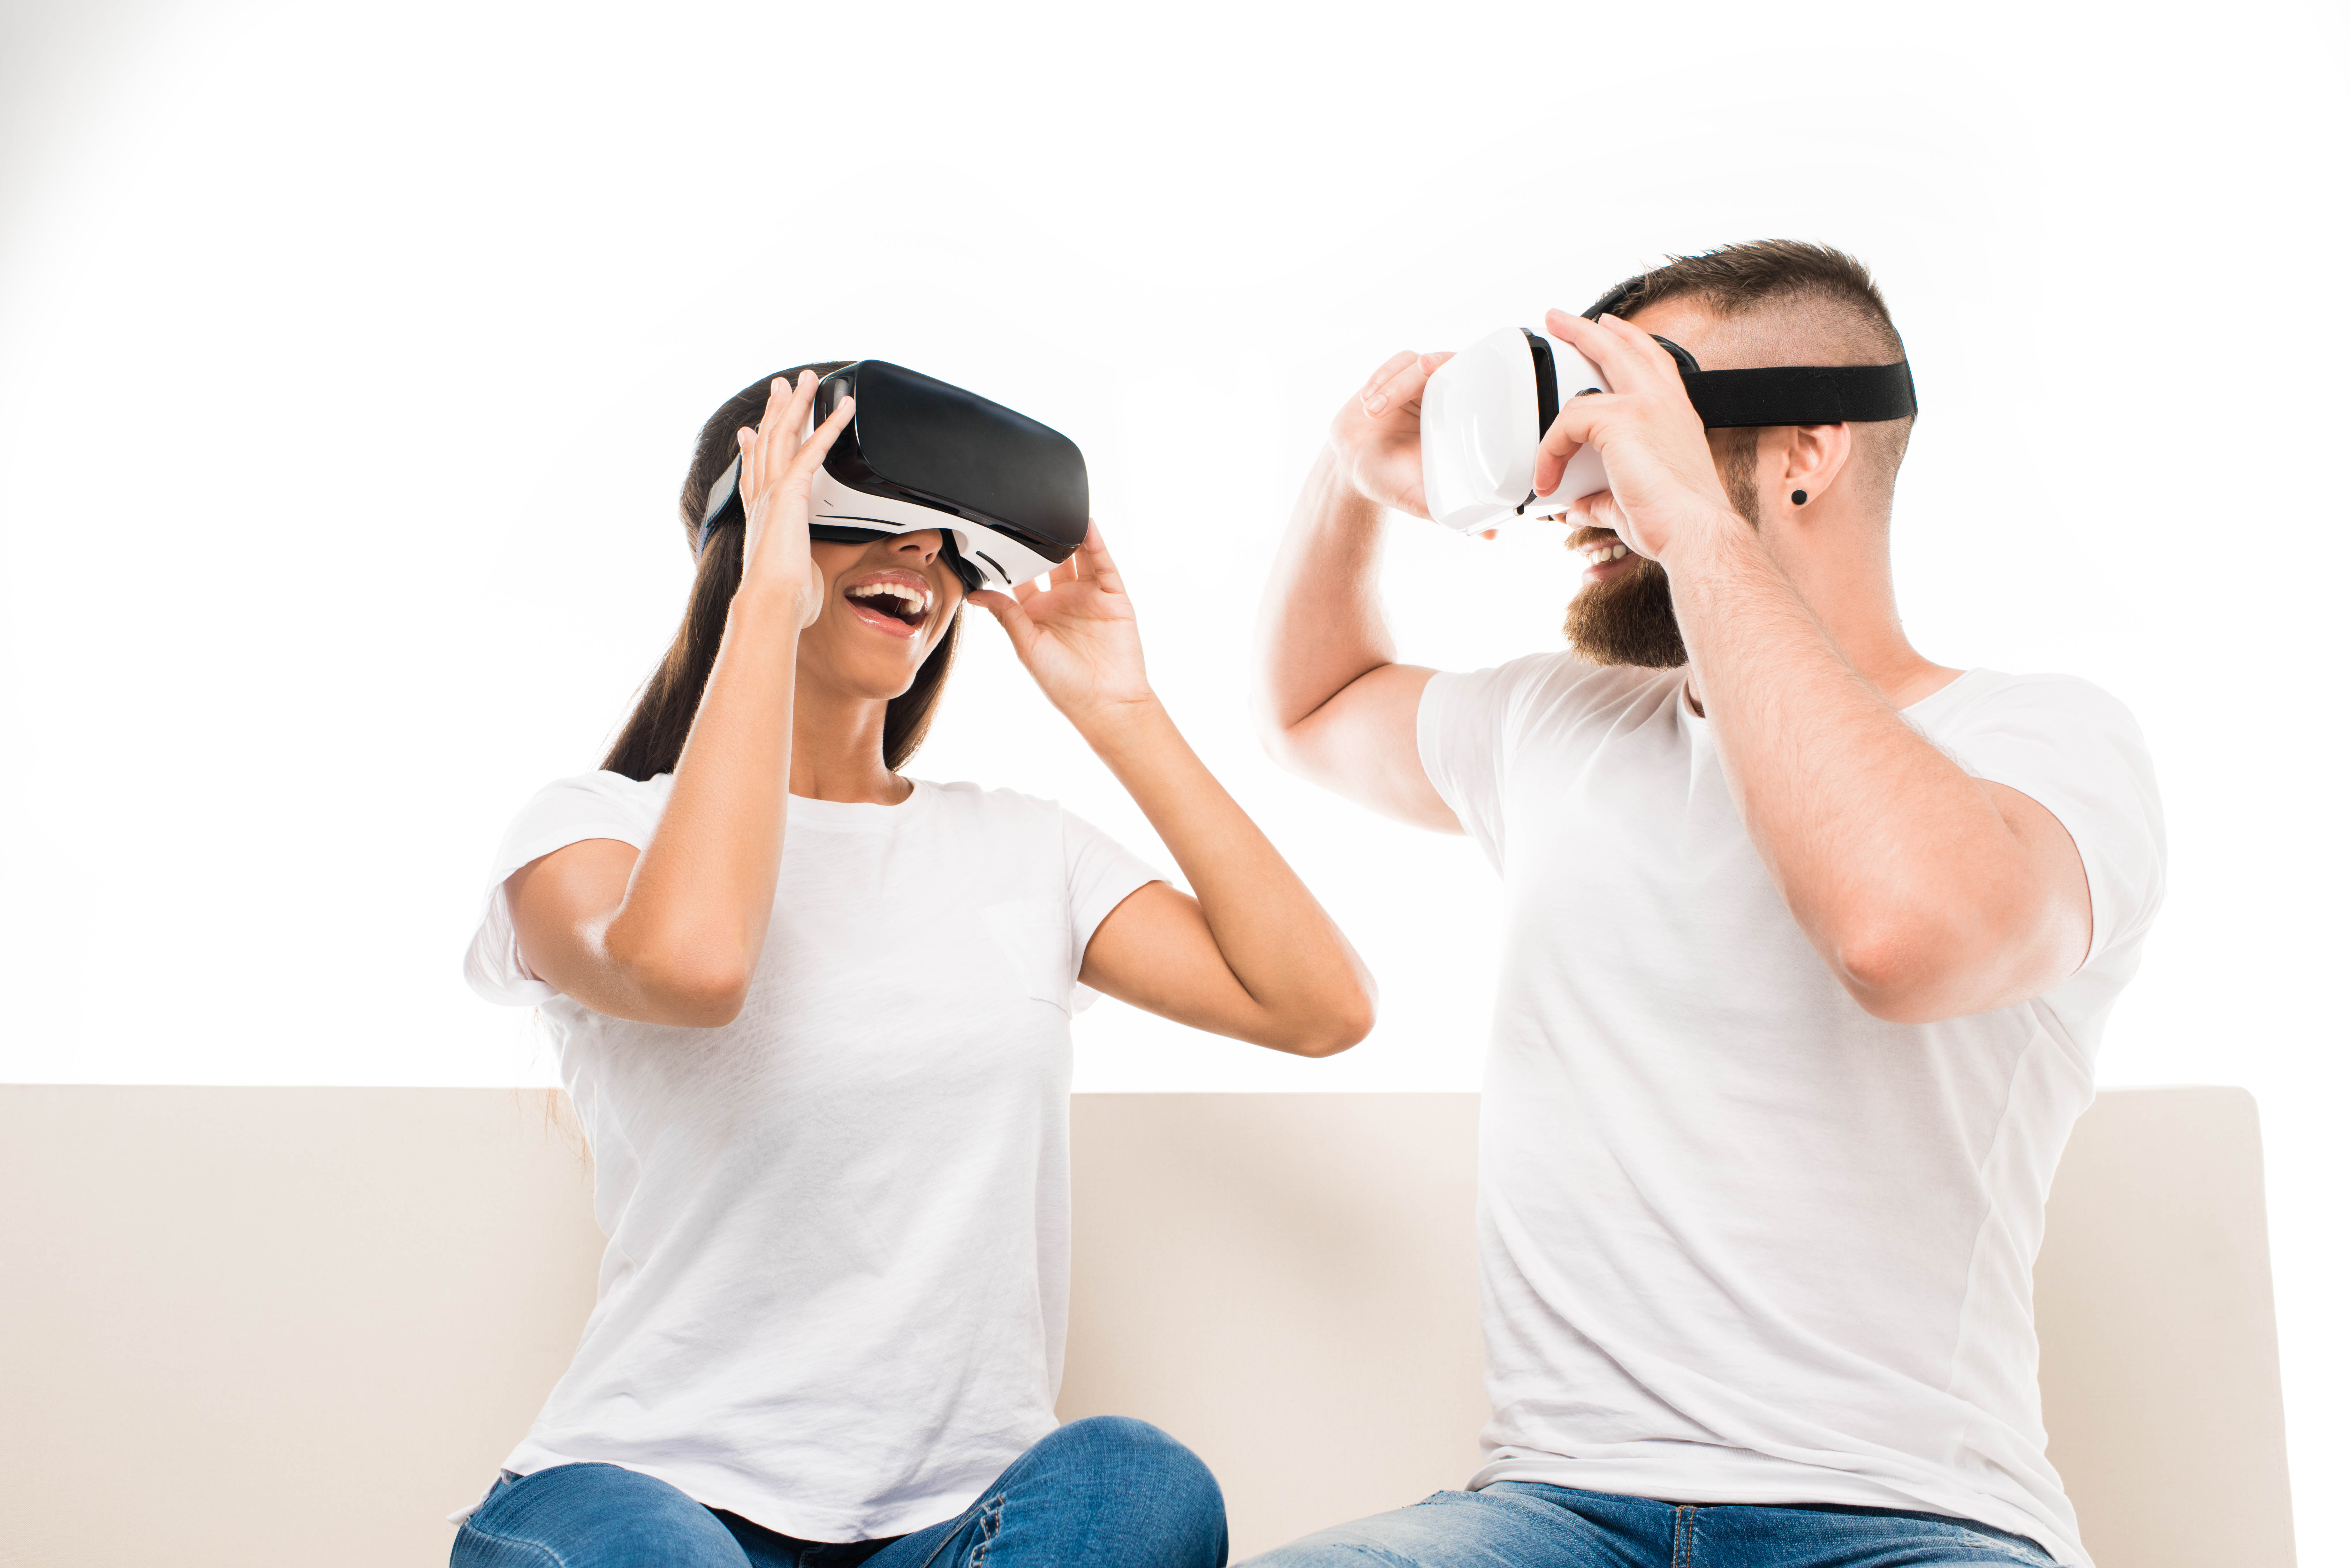 The Revolution in Virtual Reality - Wall-Street.com